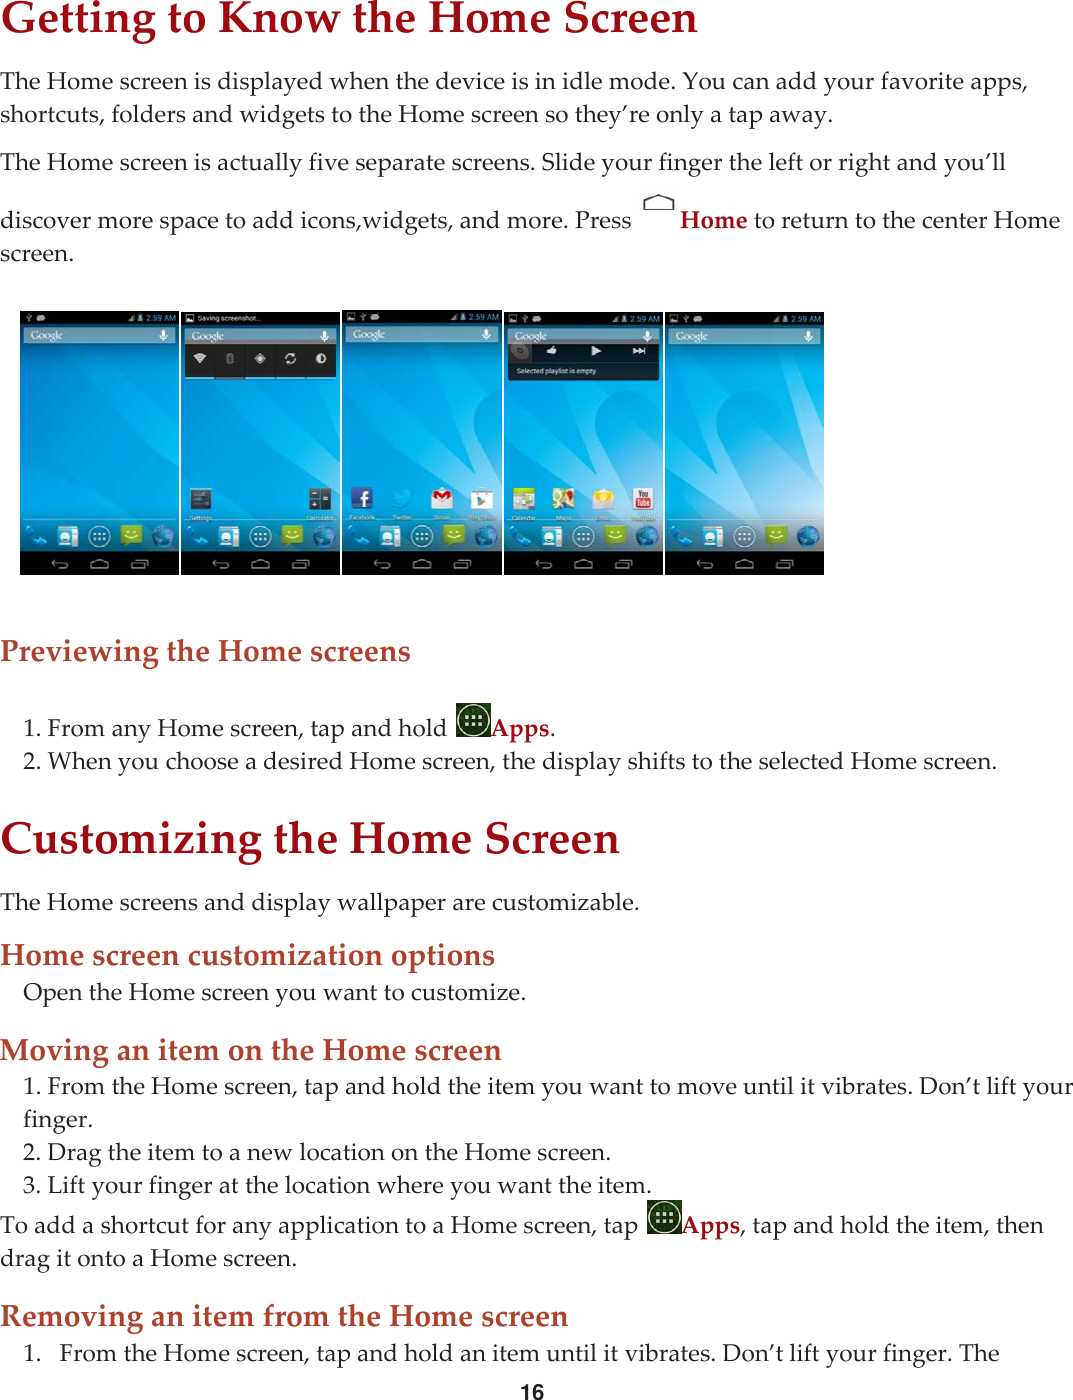 16GettingtoKnowtheHomeScreenTheHomescreenisdisplayedwhenthedeviceisinidlemode.Youcanaddyourfavoriteapps,shortcuts,foldersandwidgetstotheHomescreensothey’reonlyatapaway.TheHomescreenisactuallyfiveseparatescreens.Slideyourfingertheleftorrightandyou’lldiscovermorespacetoaddicons,widgets,andmore.Press HometoreturntothecenterHomescreen.PreviewingtheHomescreens1.FromanyHomescreen,tapandholdApps.2.WhenyouchooseadesiredHomescreen,thedisplayshiftstotheselectedHomescreen.CustomizingtheHomeScreenTheHomescreensanddisplaywallpaperarecustomizable.HomescreencustomizationoptionsOpentheHomescreenyouwanttocustomize.MovinganitemontheHomescreen1.FromtheHomescreen,tapandholdtheitemyouwanttomoveuntilitvibrates.Don’tliftyourfinger.2.DragtheitemtoanewlocationontheHomescreen.3.Liftyourfingeratthelocationwhereyouwanttheitem.ToaddashortcutforanyapplicationtoaHomescreen,tapApps,tapandholdtheitem,thendragitontoaHomescreen.RemovinganitemfromtheHomescreen1. FromtheHomescreen,tapandholdanitemuntilitvibrates.Don’tliftyourfinger.The